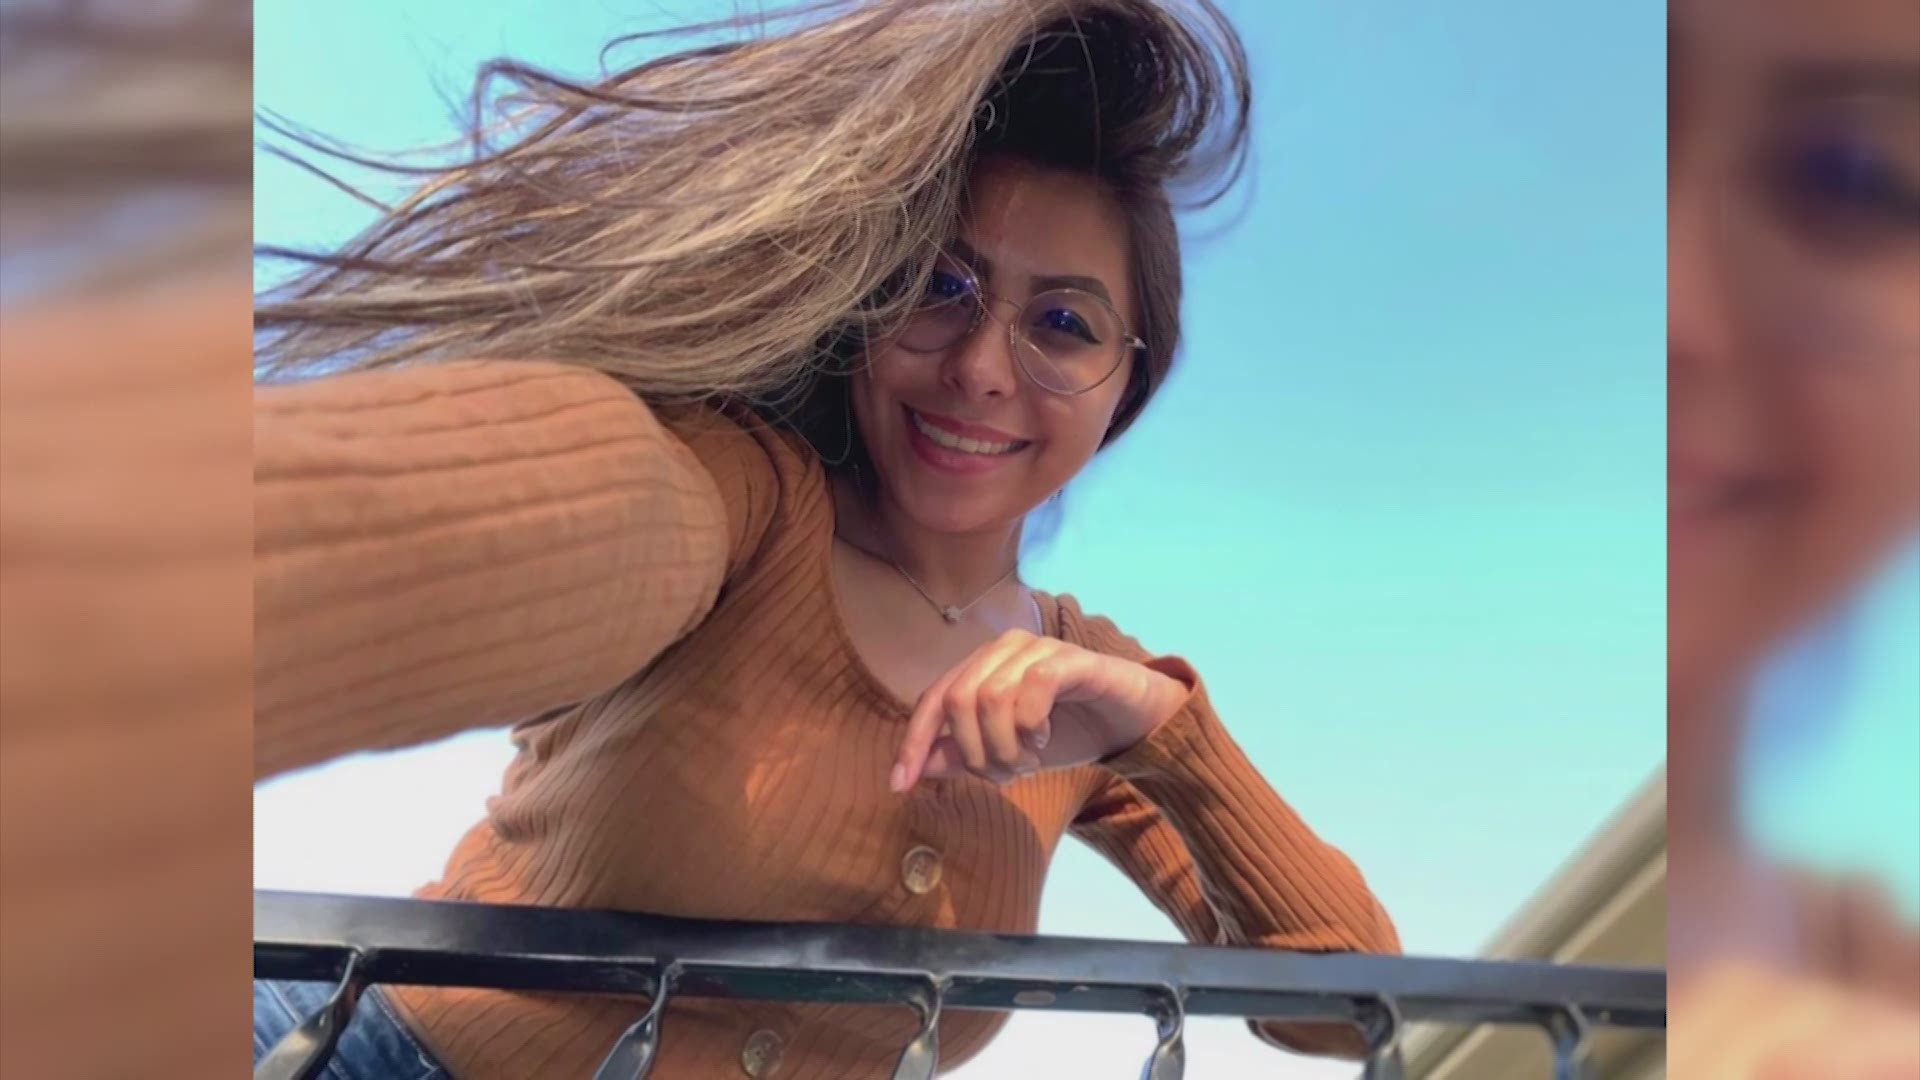 Friends and family are left with grief and questions after 20-year-old Alyssa Gonzales died in a hit-and-run crash in Pflugerville on Friday morning, May 28.